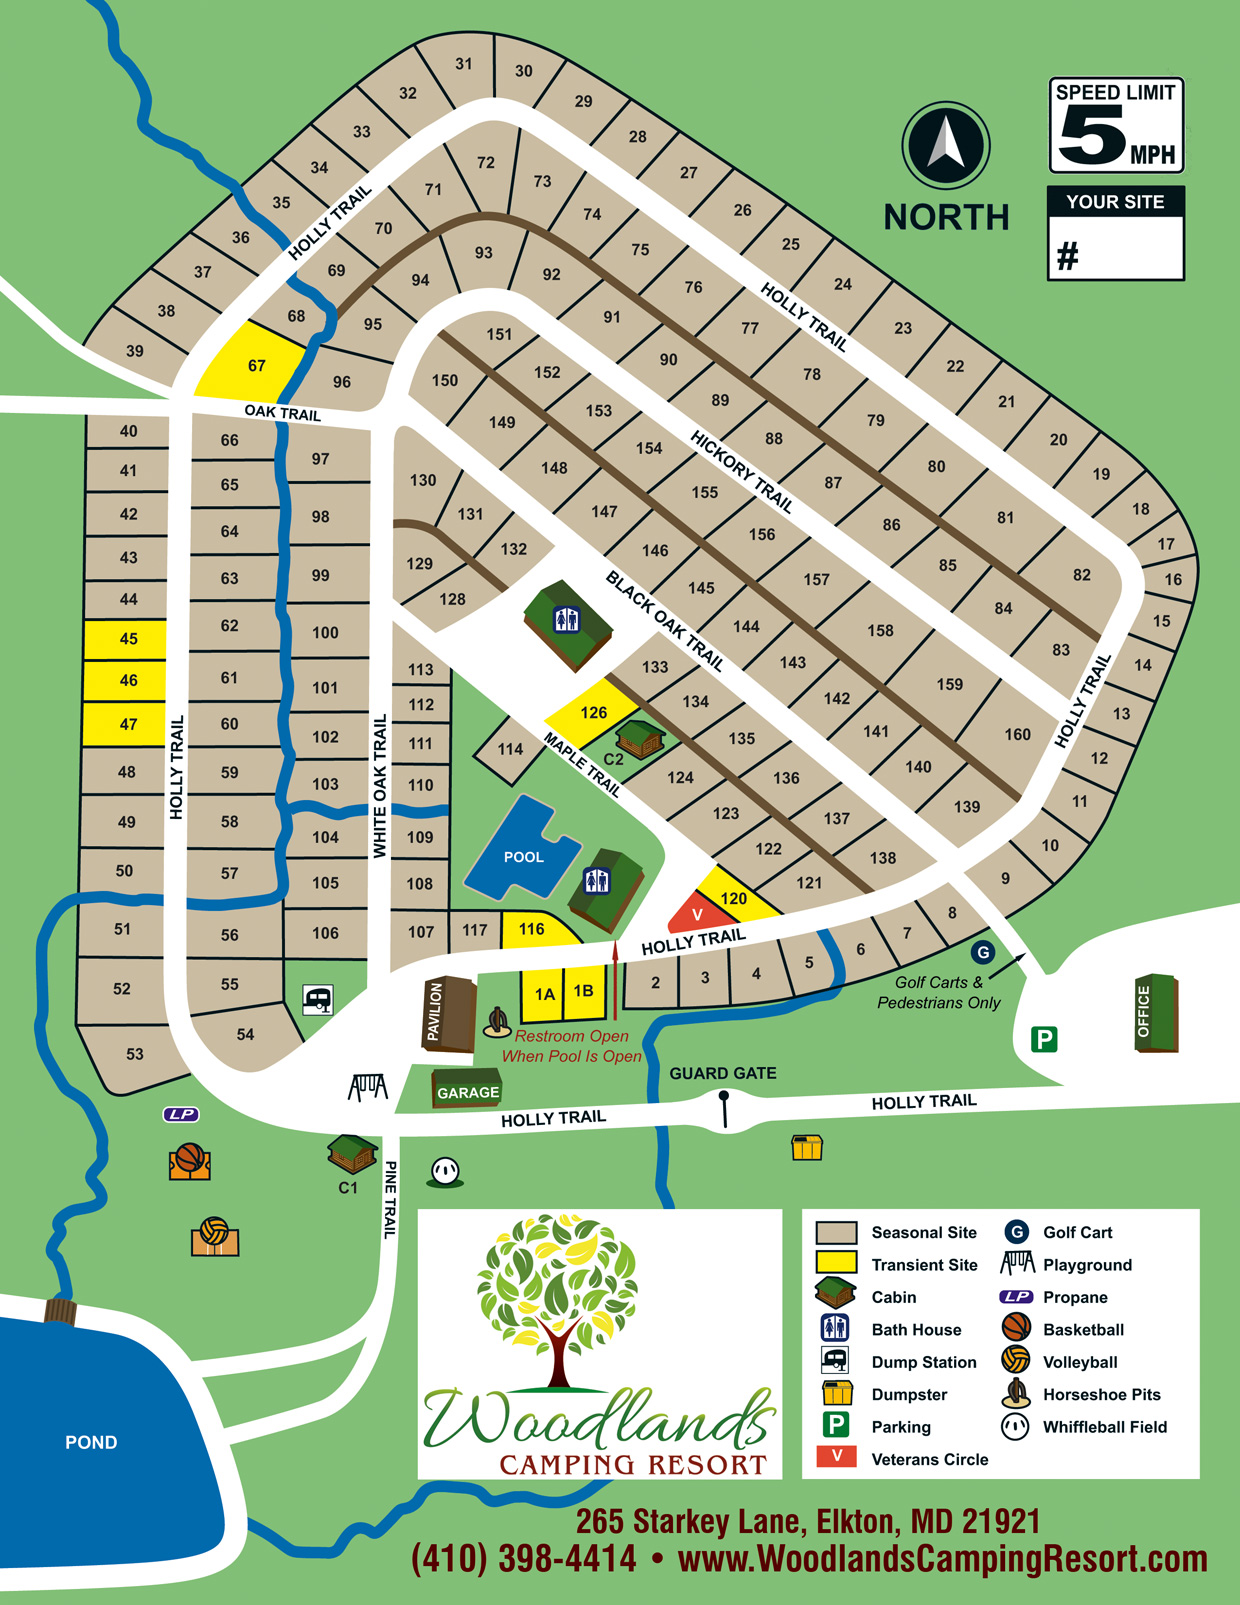 Woodlands Camping Resort : Site Map & Rules